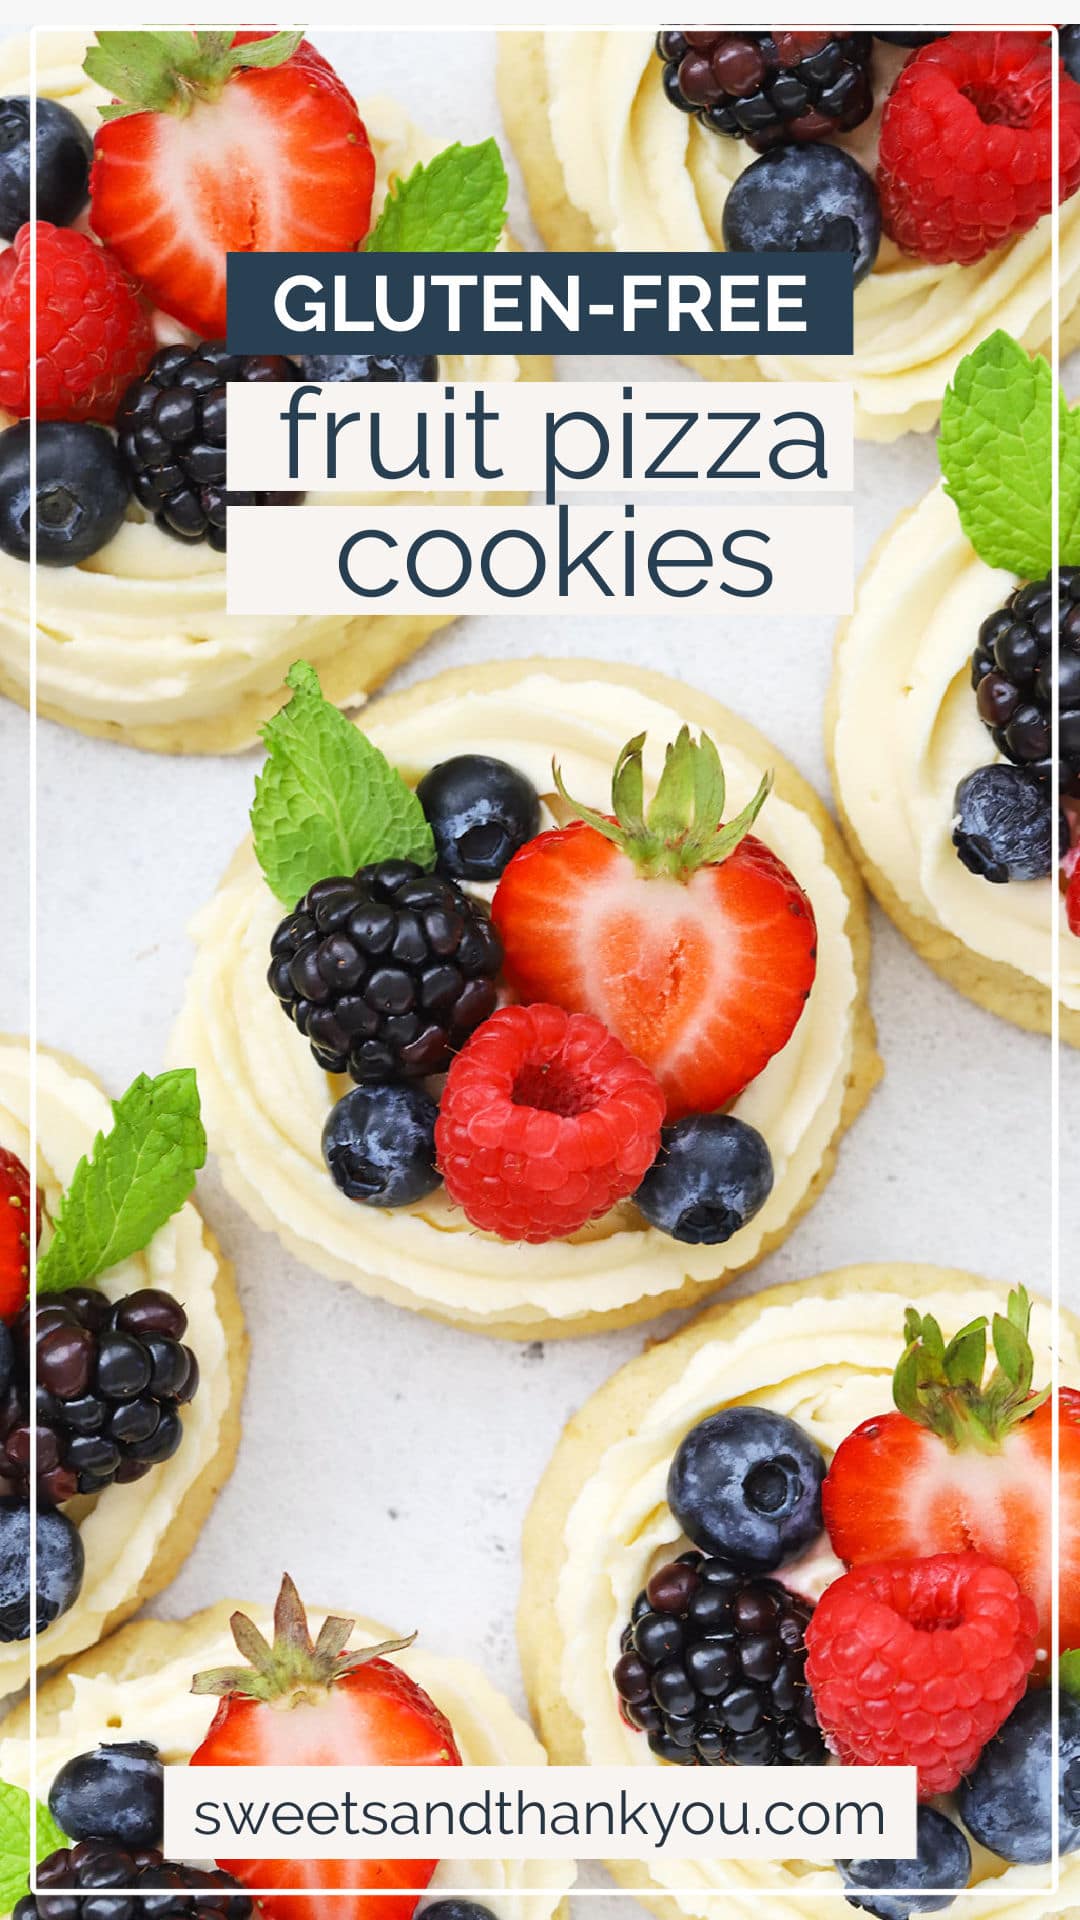 Mini Fruit Pizza Cookies - These mini gluten-free fruit pizzas are made from gluten-Free lemon sugar cookies, a light cream cheese frosting, and fresh berries. They're beautiful and easy! // Gluten-Free Fruit Pizza // Mini Fruit Pizzas // Fruit pizza cookie recipe // Gluten Free lemon cookies 